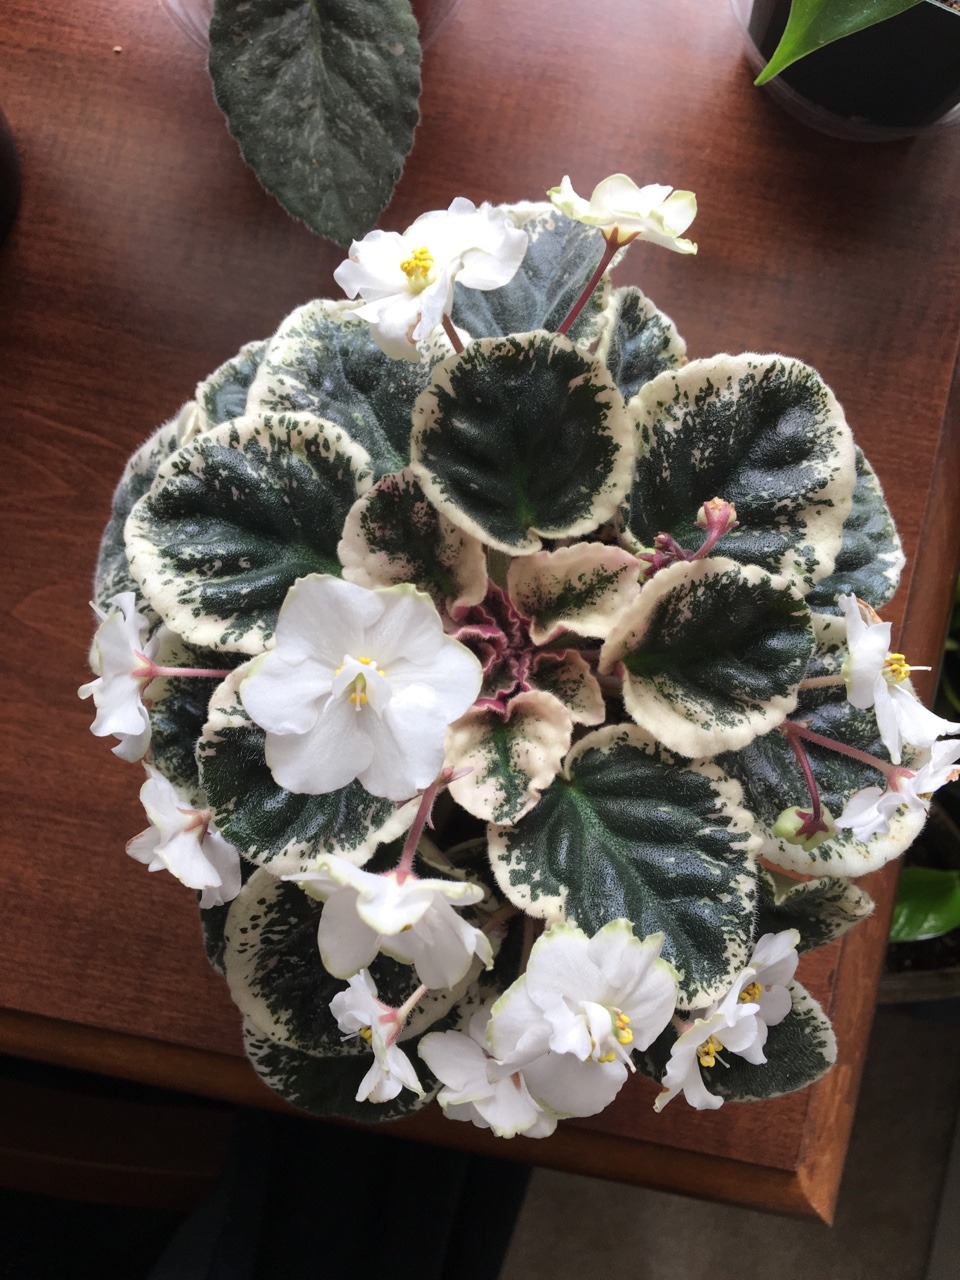 gardenandtable:An African Violet that I’m exceptionally proud of. There are many